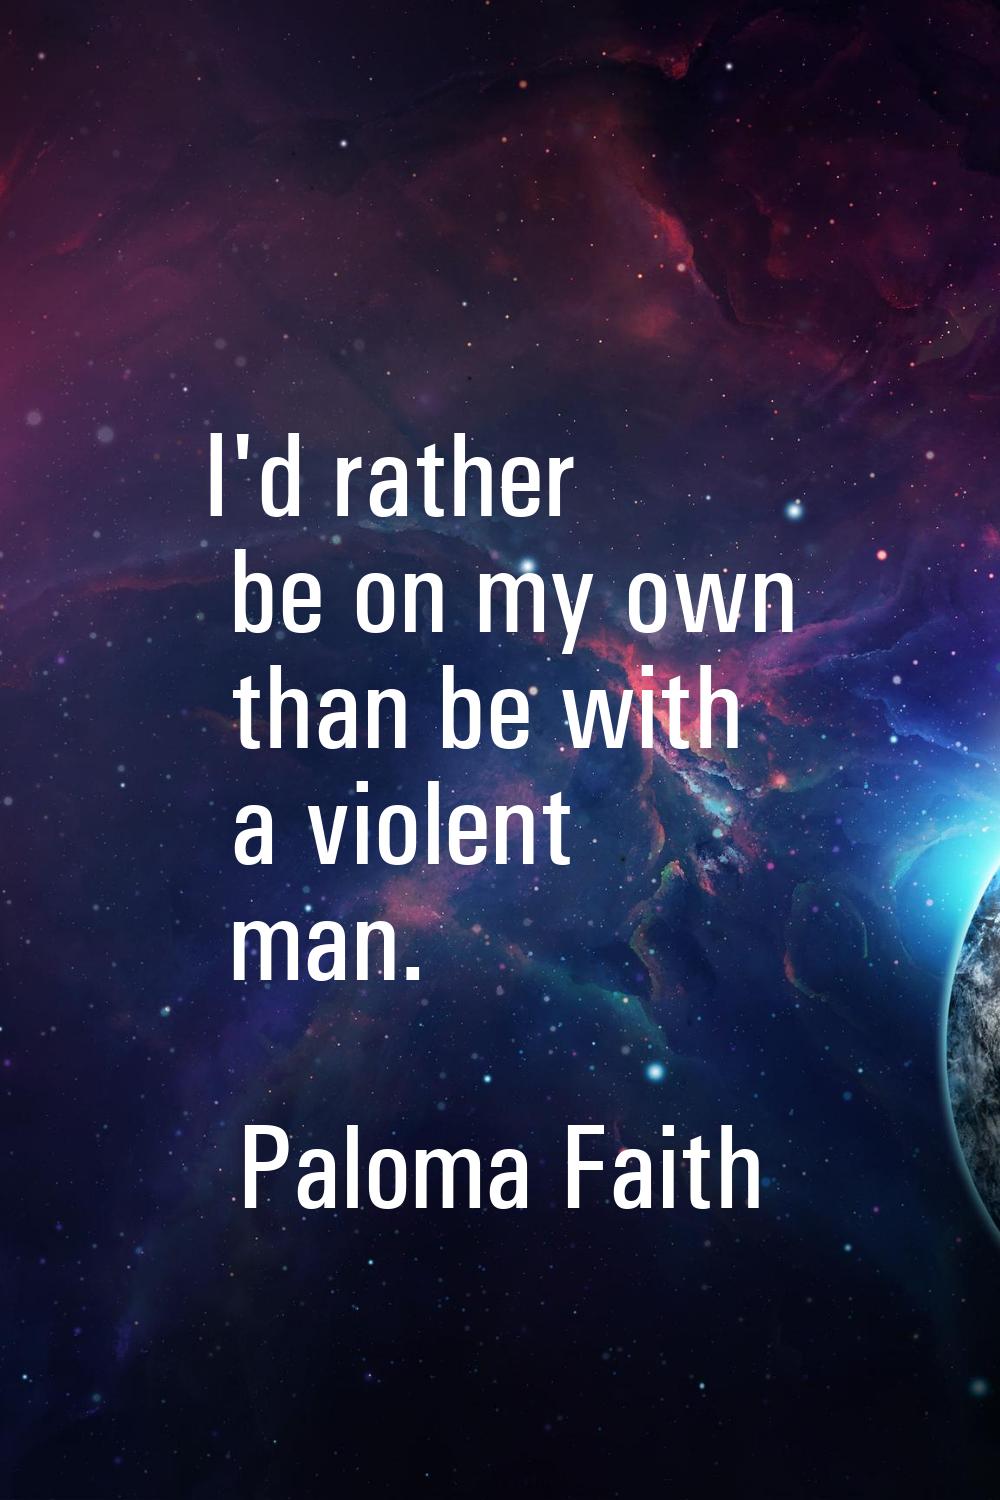 I'd rather be on my own than be with a violent man.